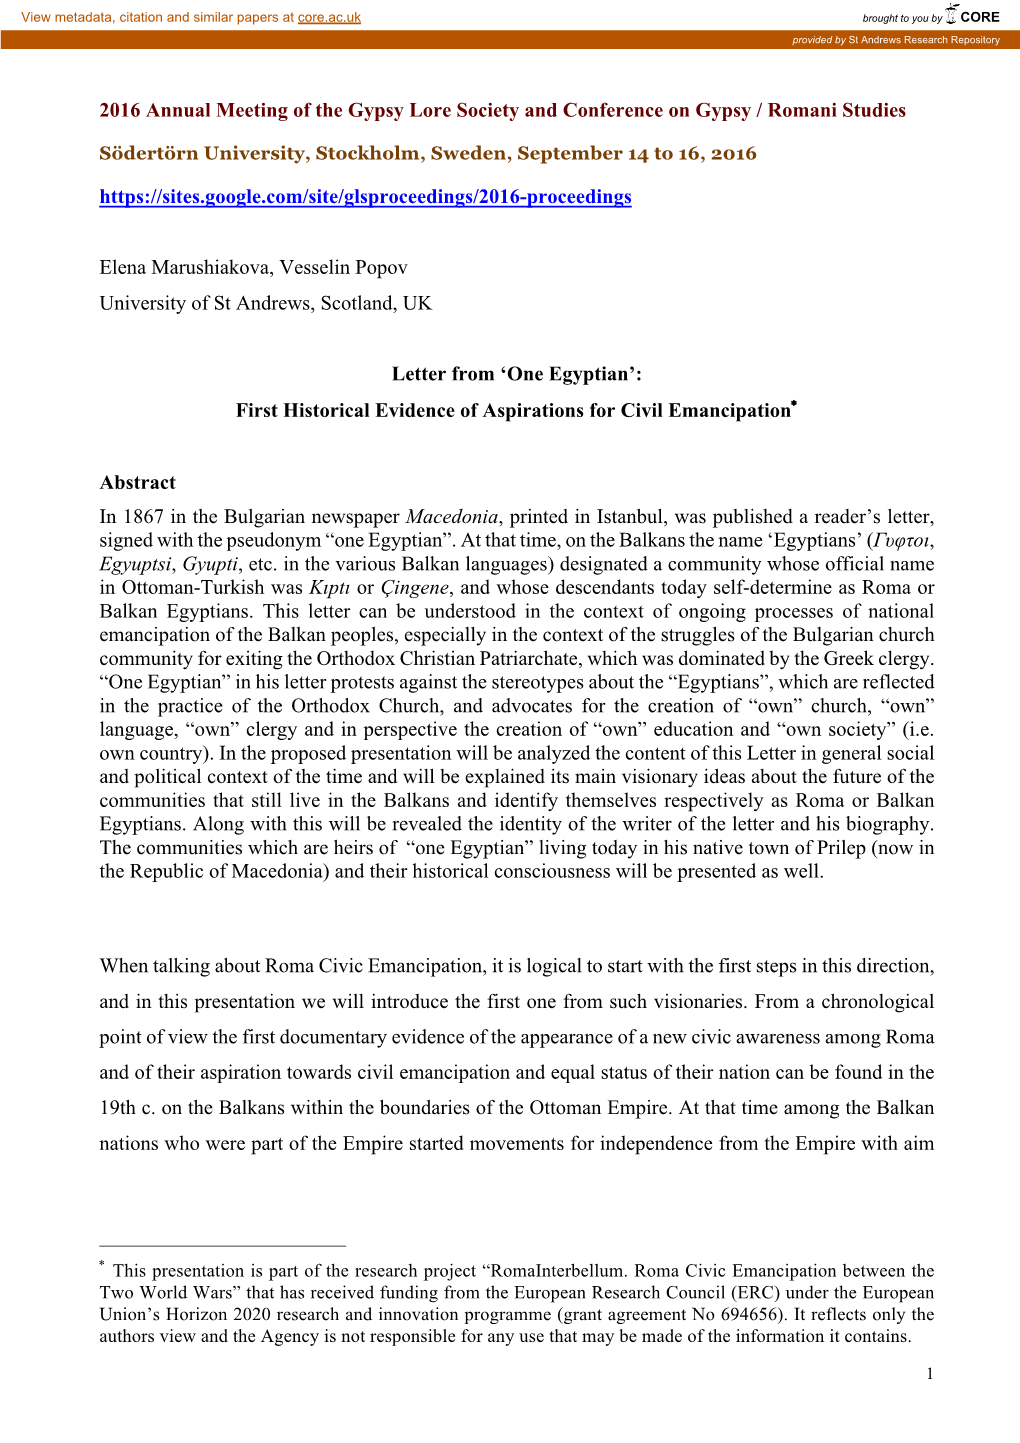 One Egyptian’: First Historical Evidence of Aspirations for Civil Emancipation*